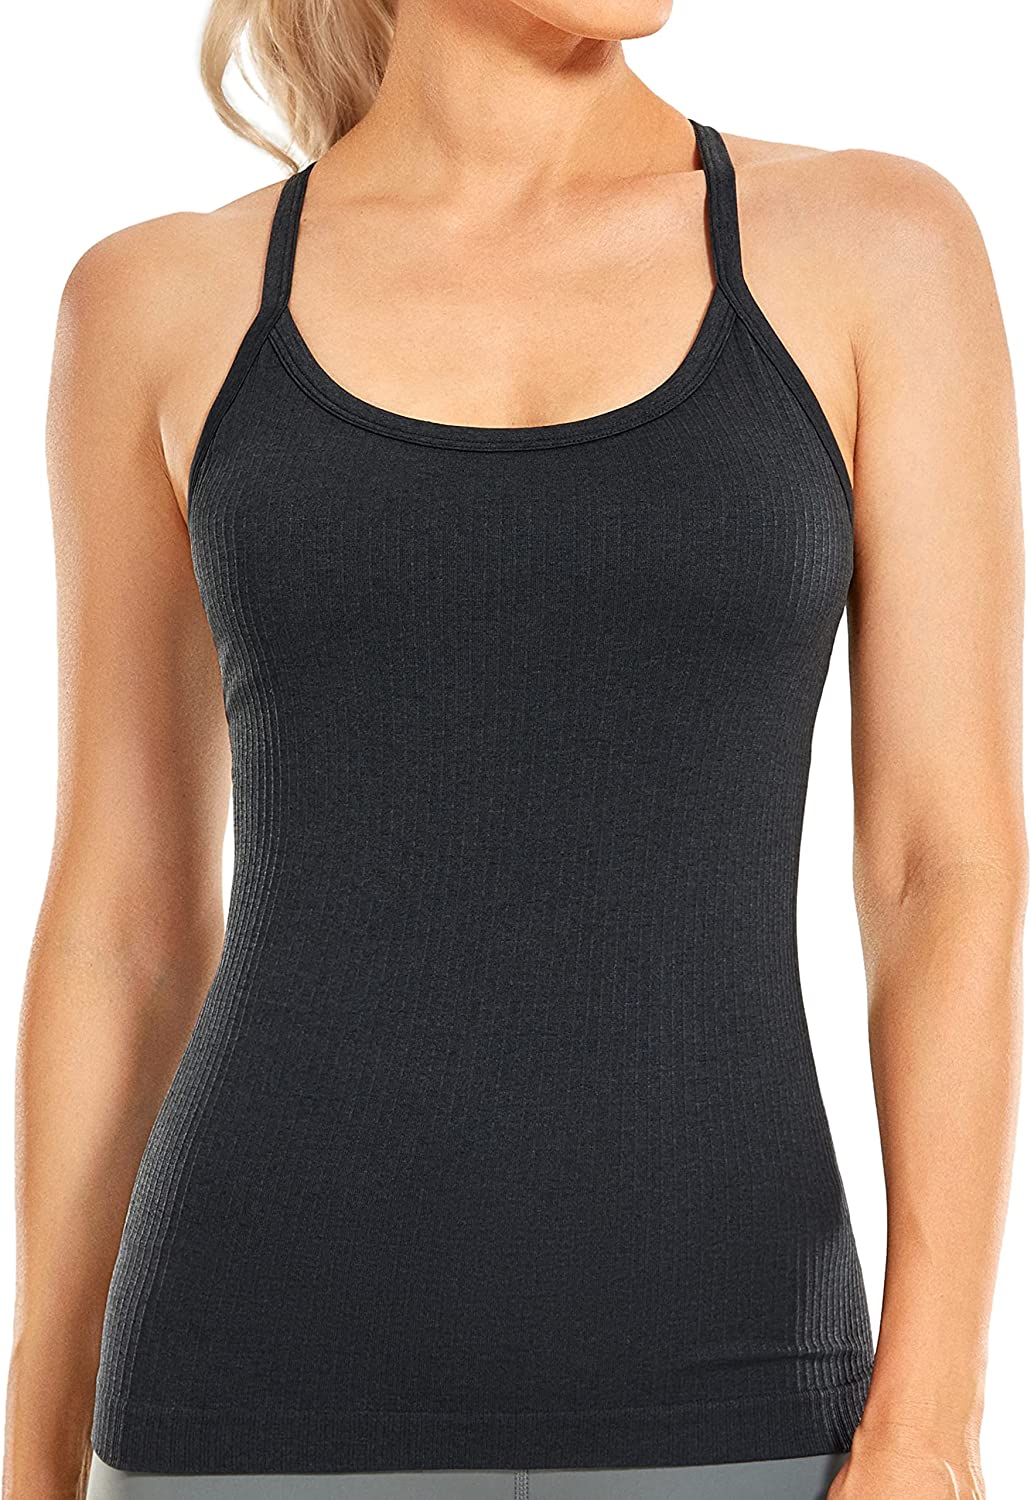 CRZ YOGA Seamless Workout Tank Tops for Women Racerback Athletic